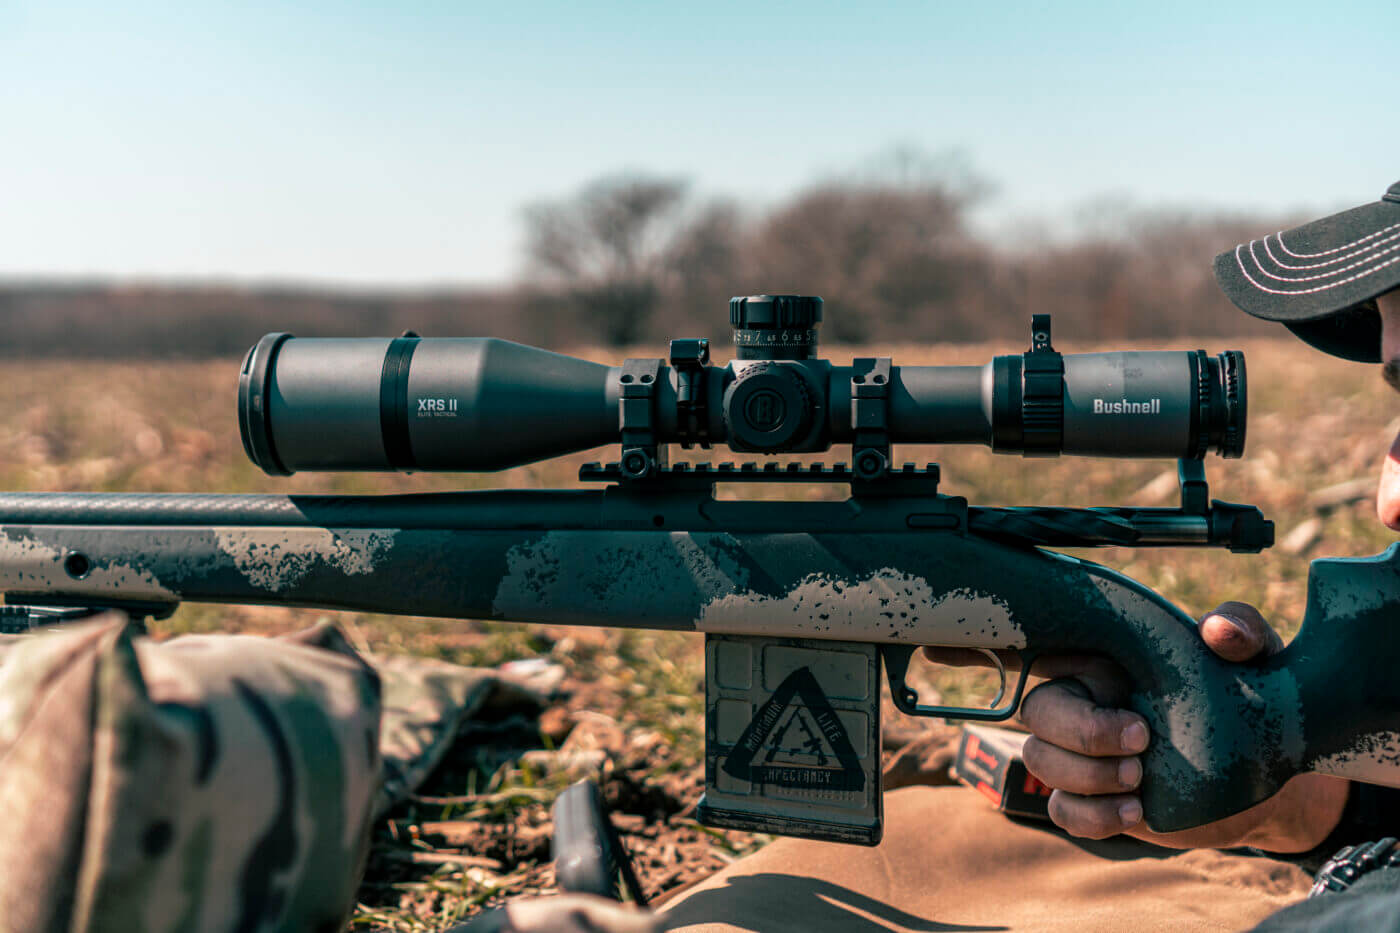 Bushnell Elite Tactical XRS II scope on a Springfield rifle